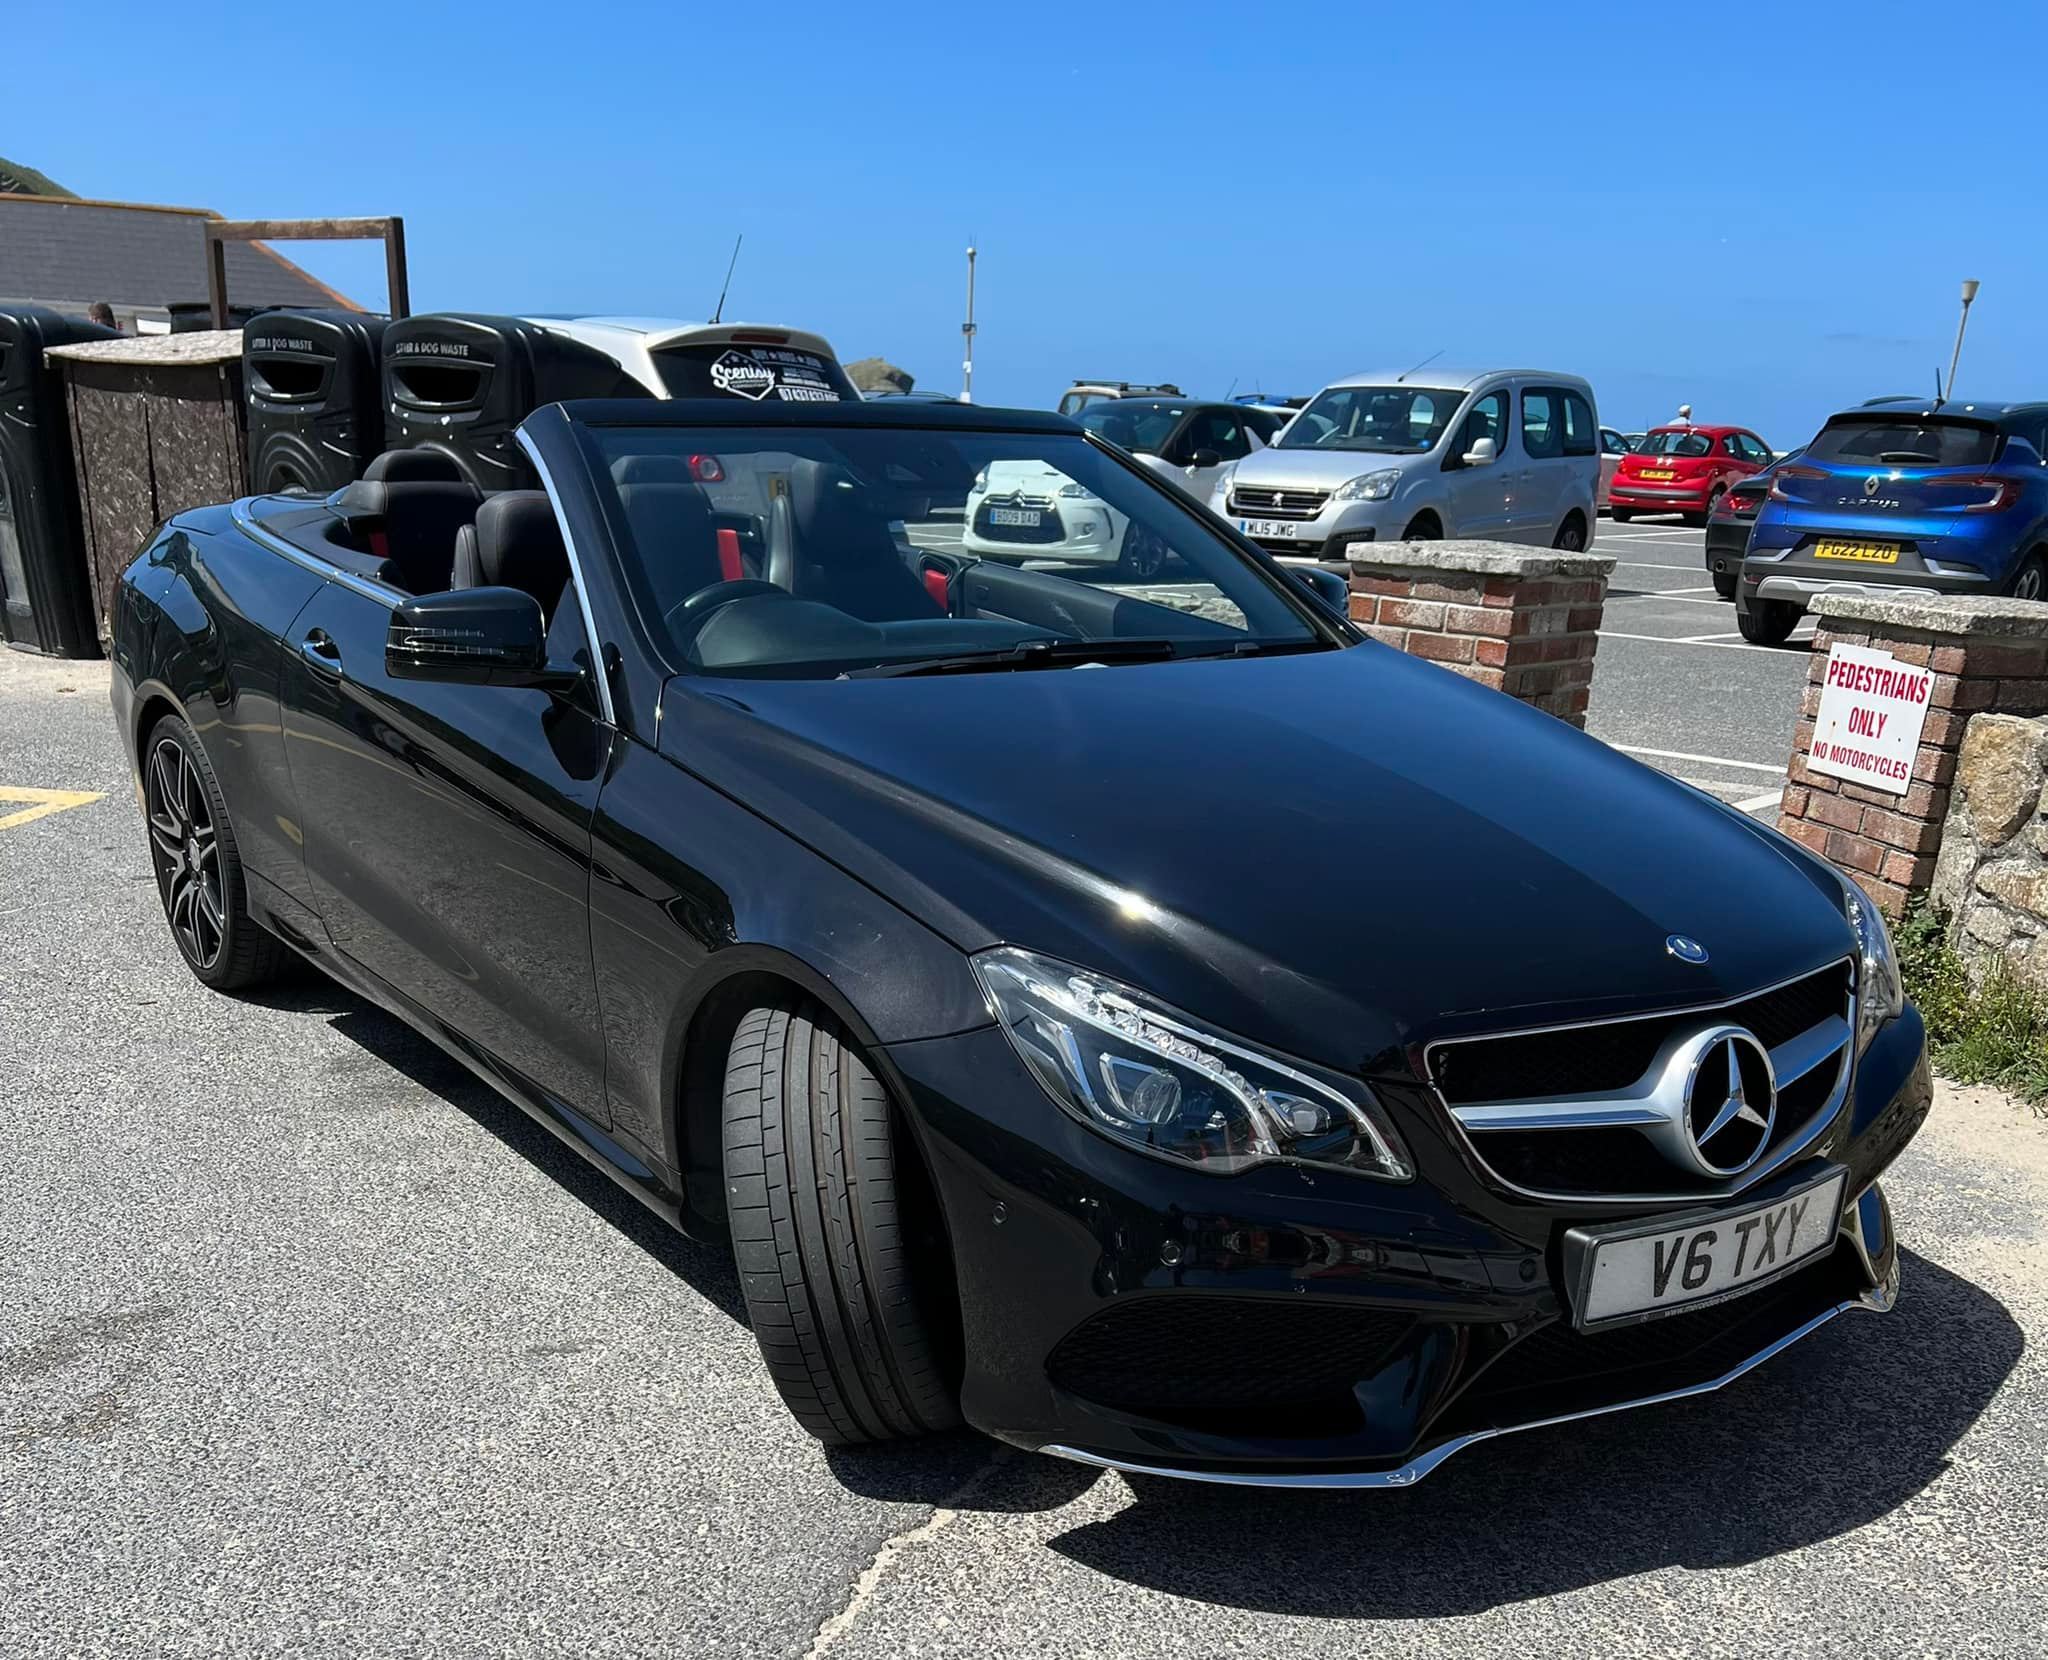 Andy will be escorting the guests to the prom in his Mercedes e class covertible. Photo: Andy Thomas